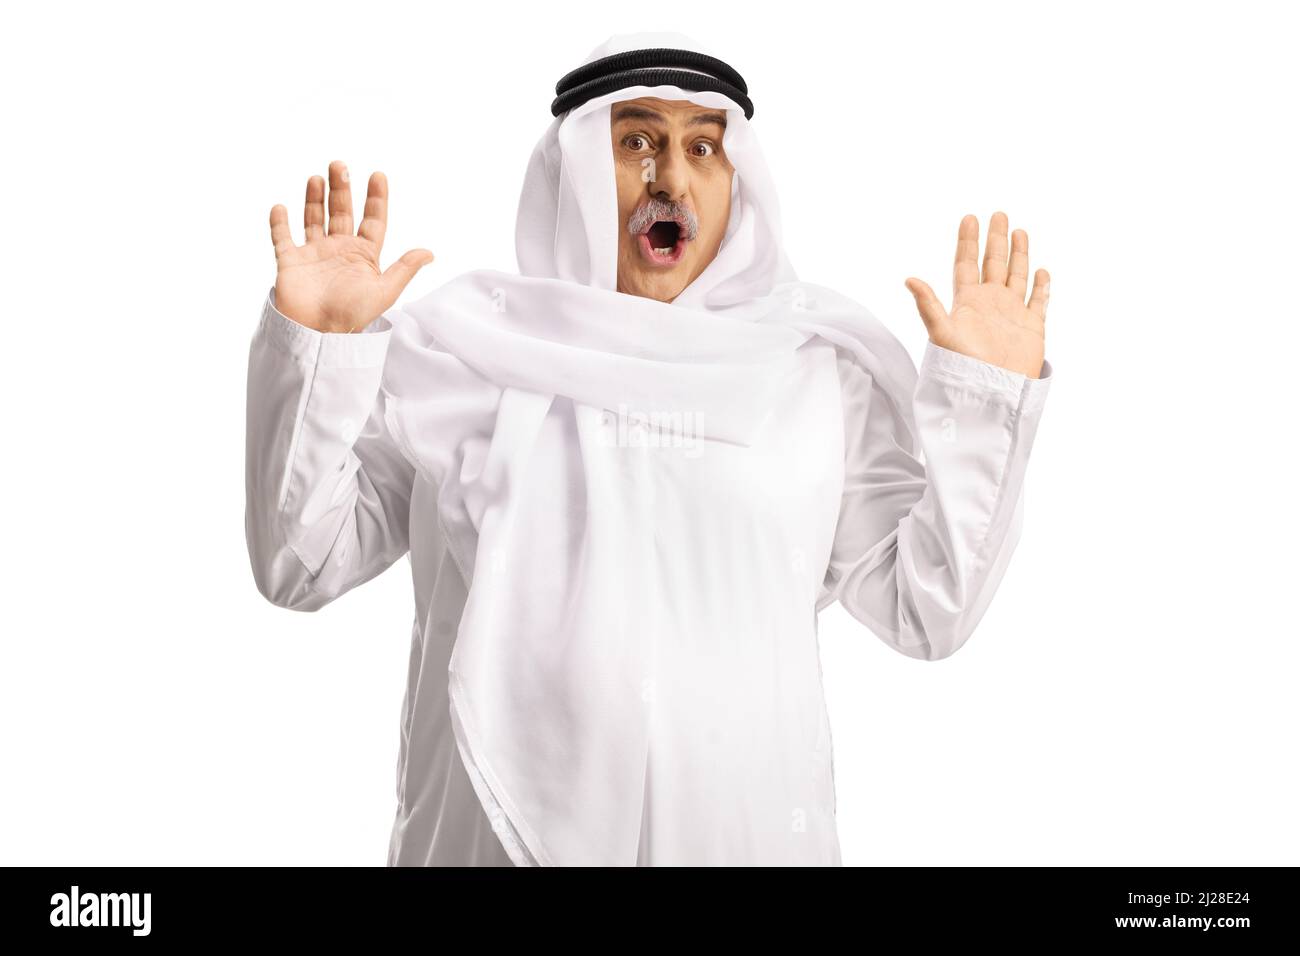 Shocked arab man with open mouth isolted on white background Stock Photo